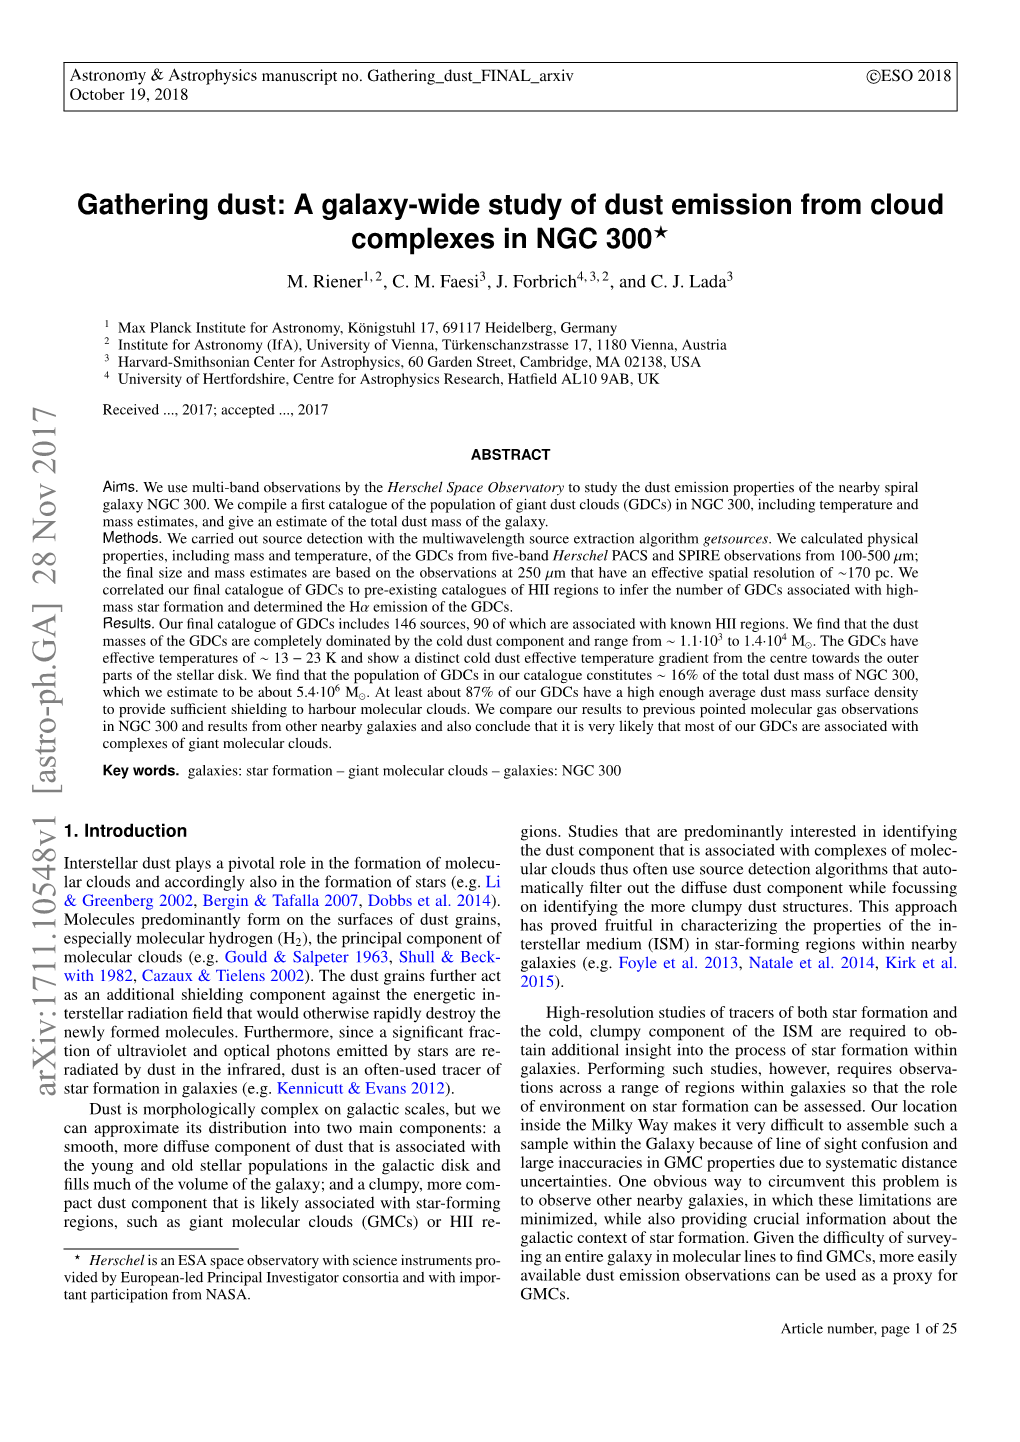 A Galaxy-Wide Study of Dust Emission from Cloud Complexes in NGC 300? M